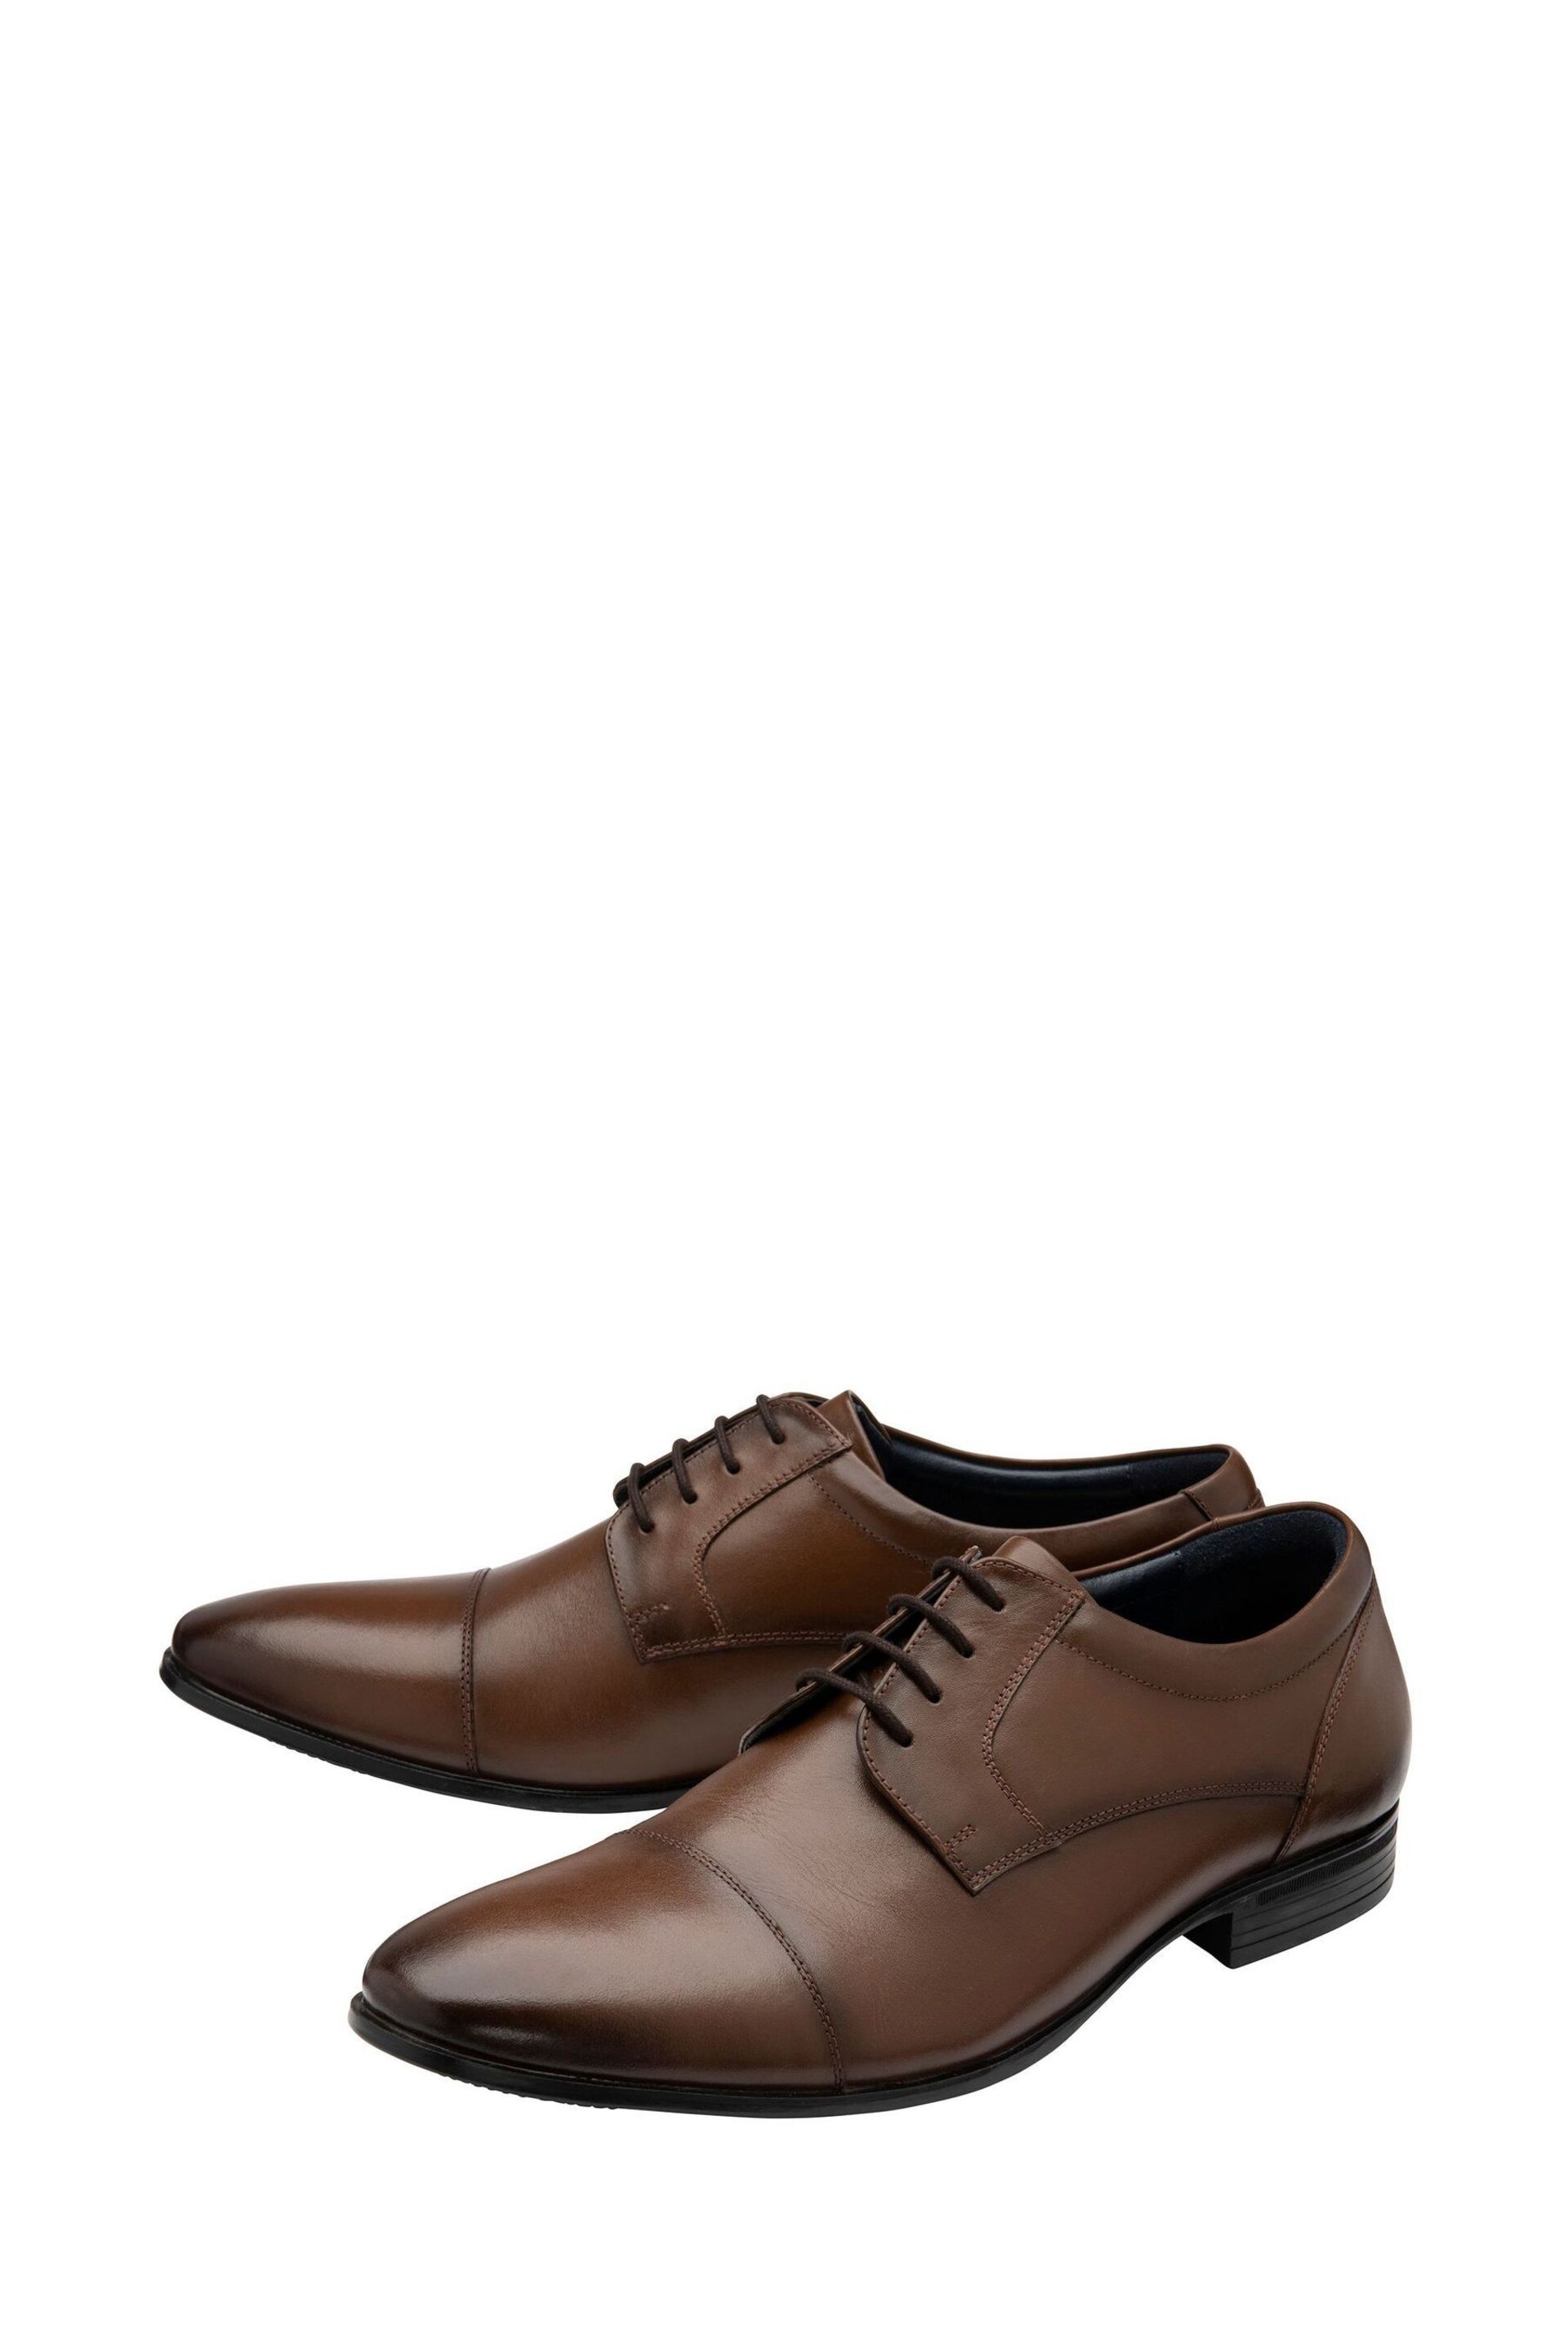 Lotus Brown Leather Oxford Shoes - Image 2 of 4